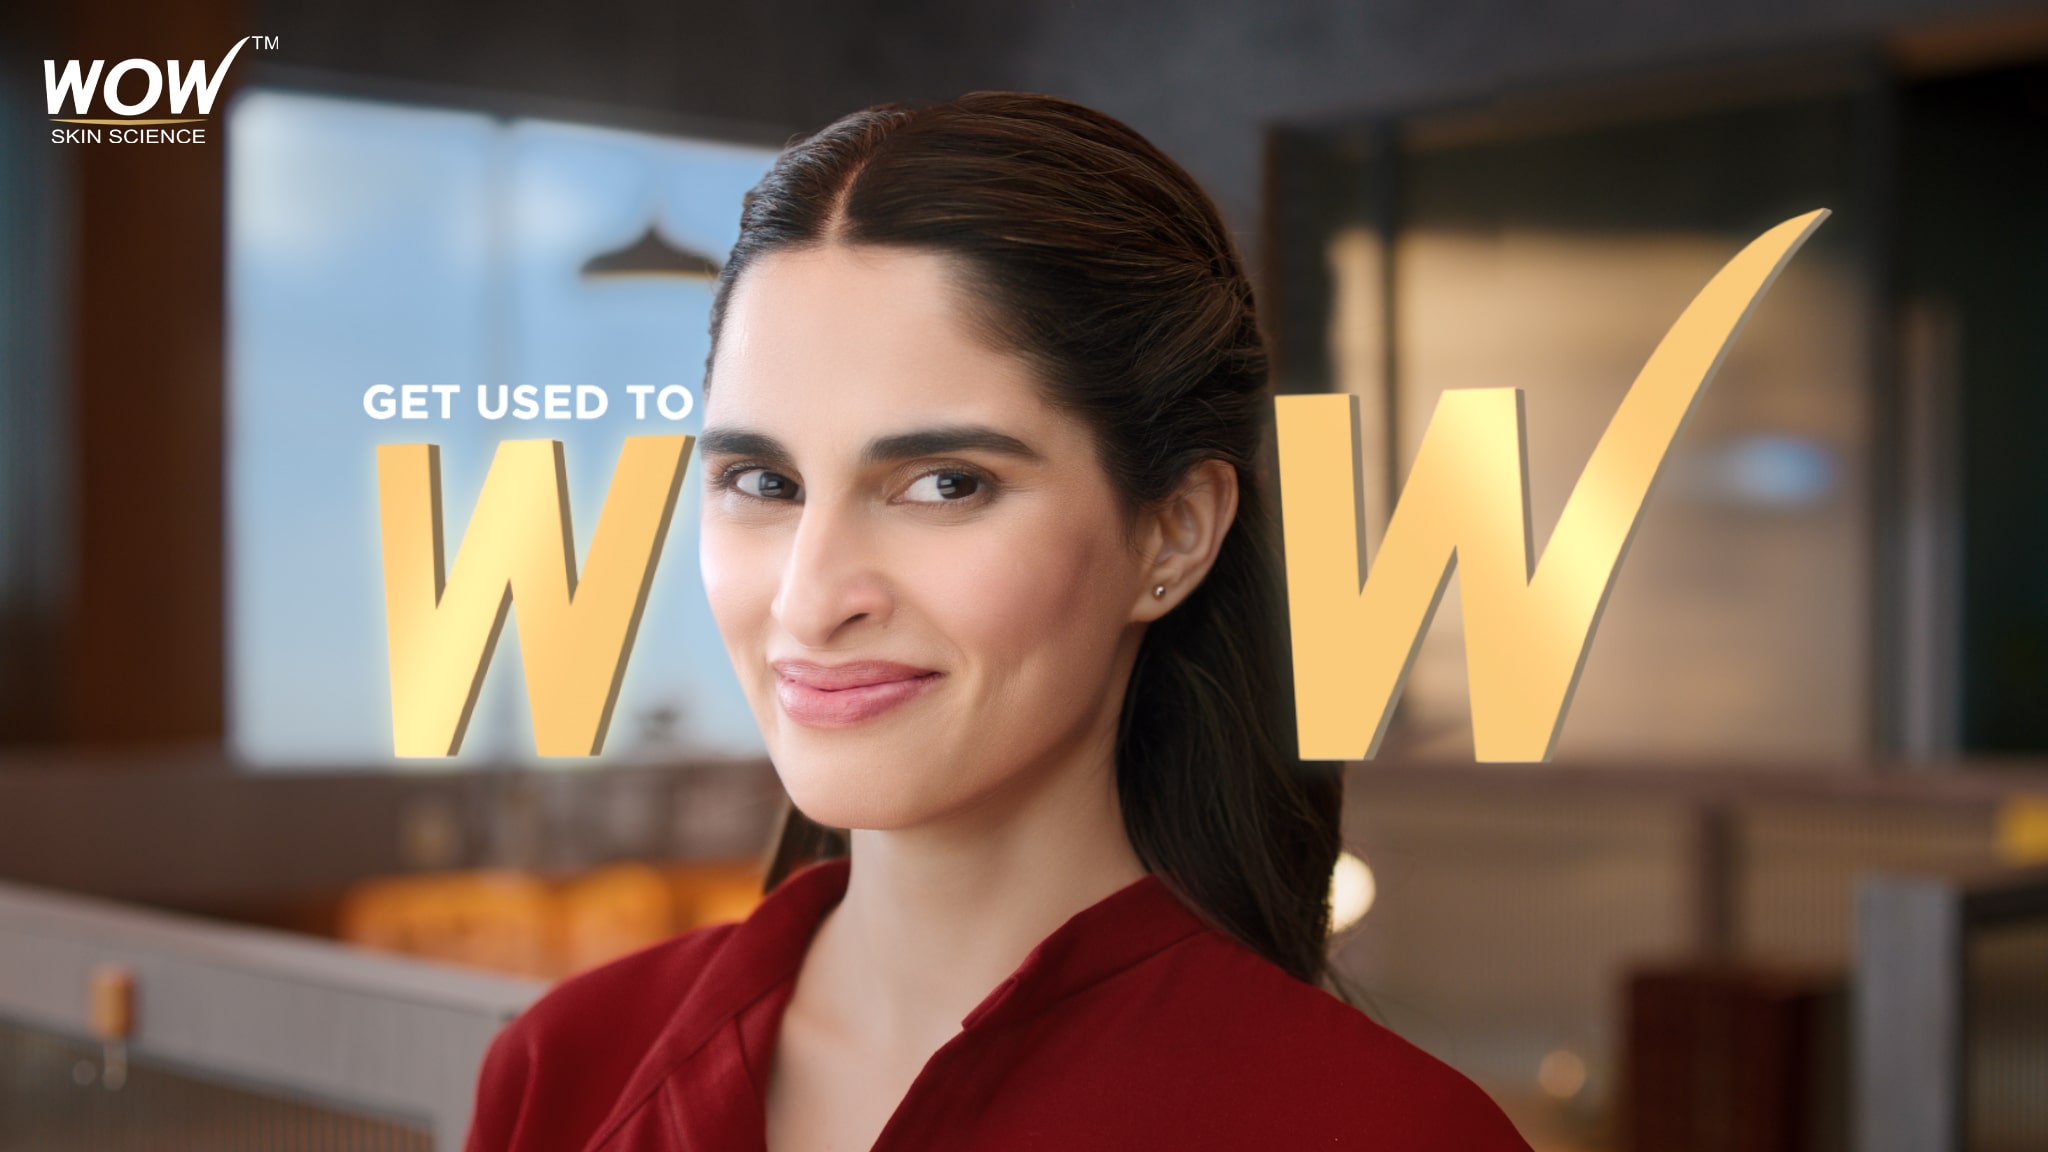 It's Time to "Get Used to WOW" with WOW Activated Naturals New Commercial